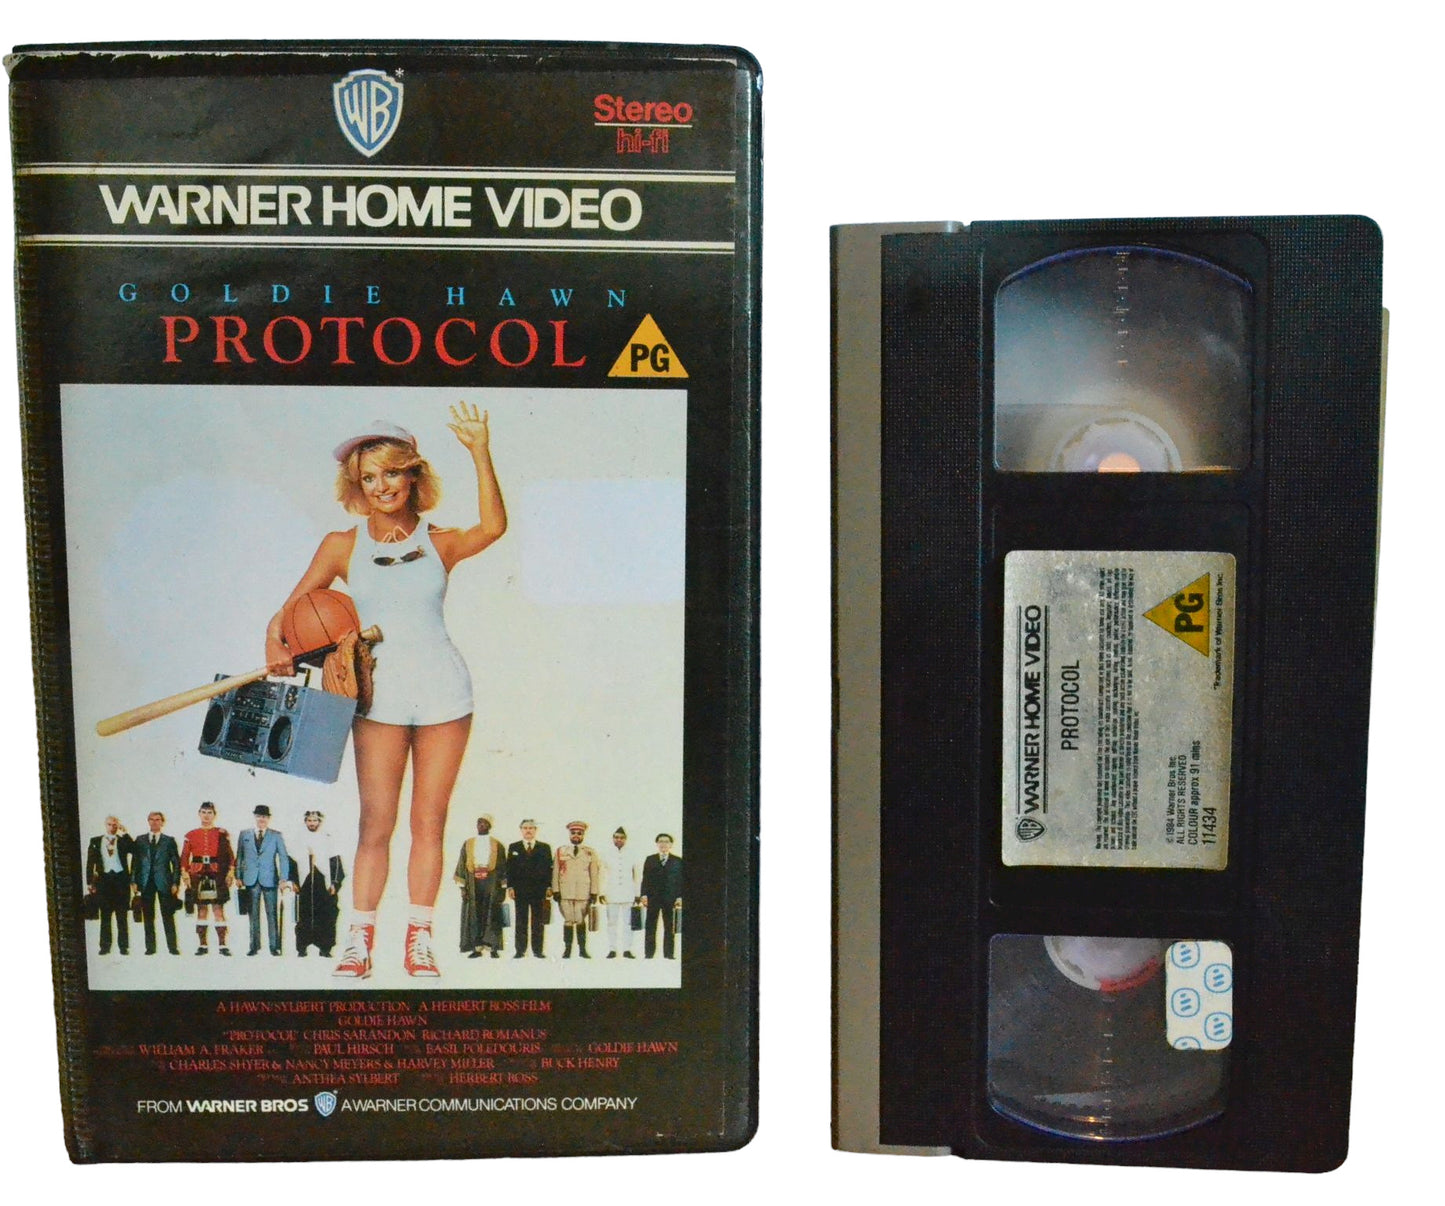 Protocol (Their Motives Are More Sinister..) - Goldie Hawn - Warner Bros Pictures - Large Box - PAL - VHS-